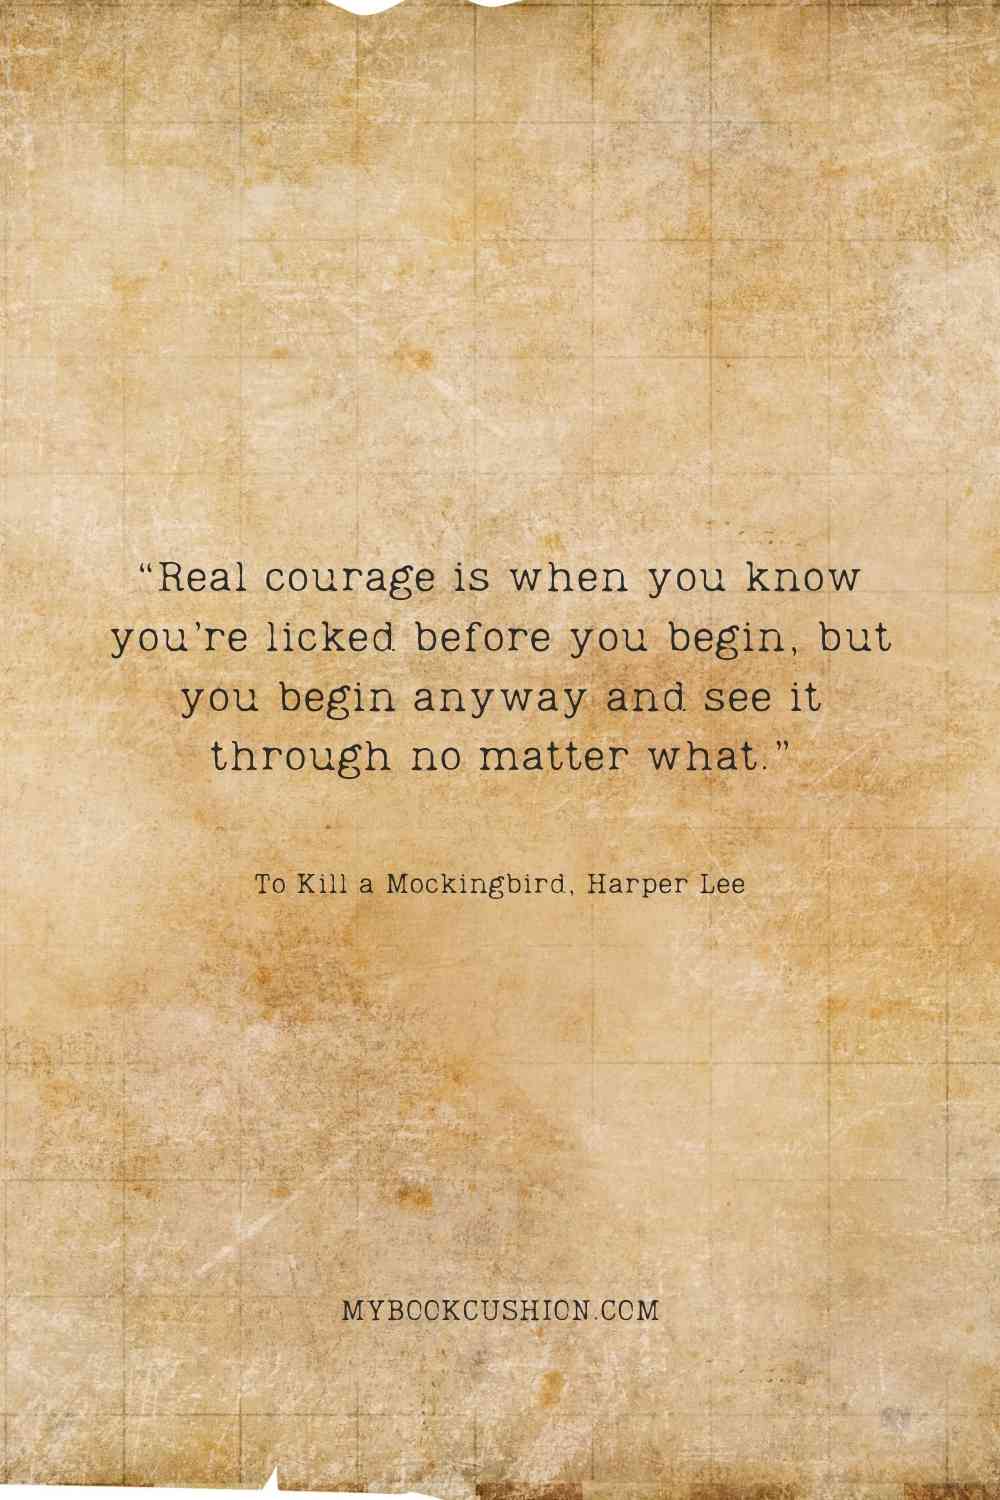 “Real courage is when you know you’re licked before you begin, but you begin anyway and see it through no matter what.” -“Real courage is when you know you’re licked before you begin, but you begin anyway and see it through no matter what.” -To Kill a Mockingbird, Harper Lee